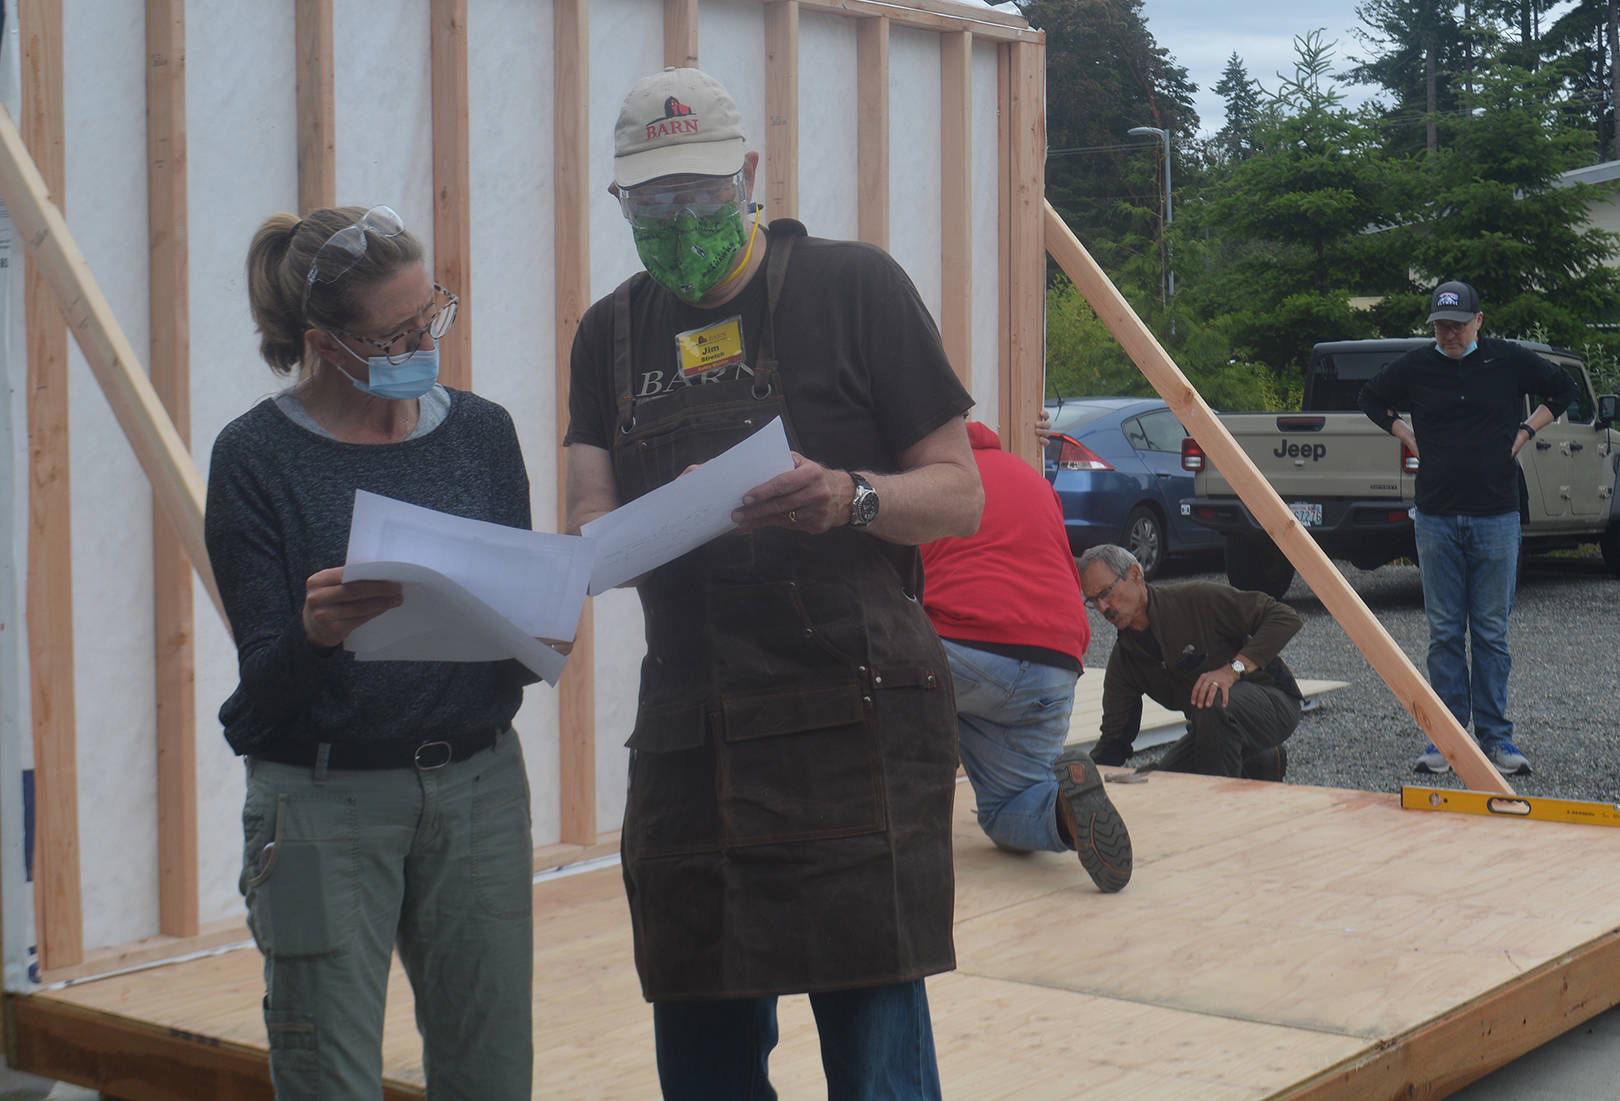 Volunteer Tammy Galbraith and “Stretch” go over the floor plans for the tiny house as volunteers put up one side of the house in the background.